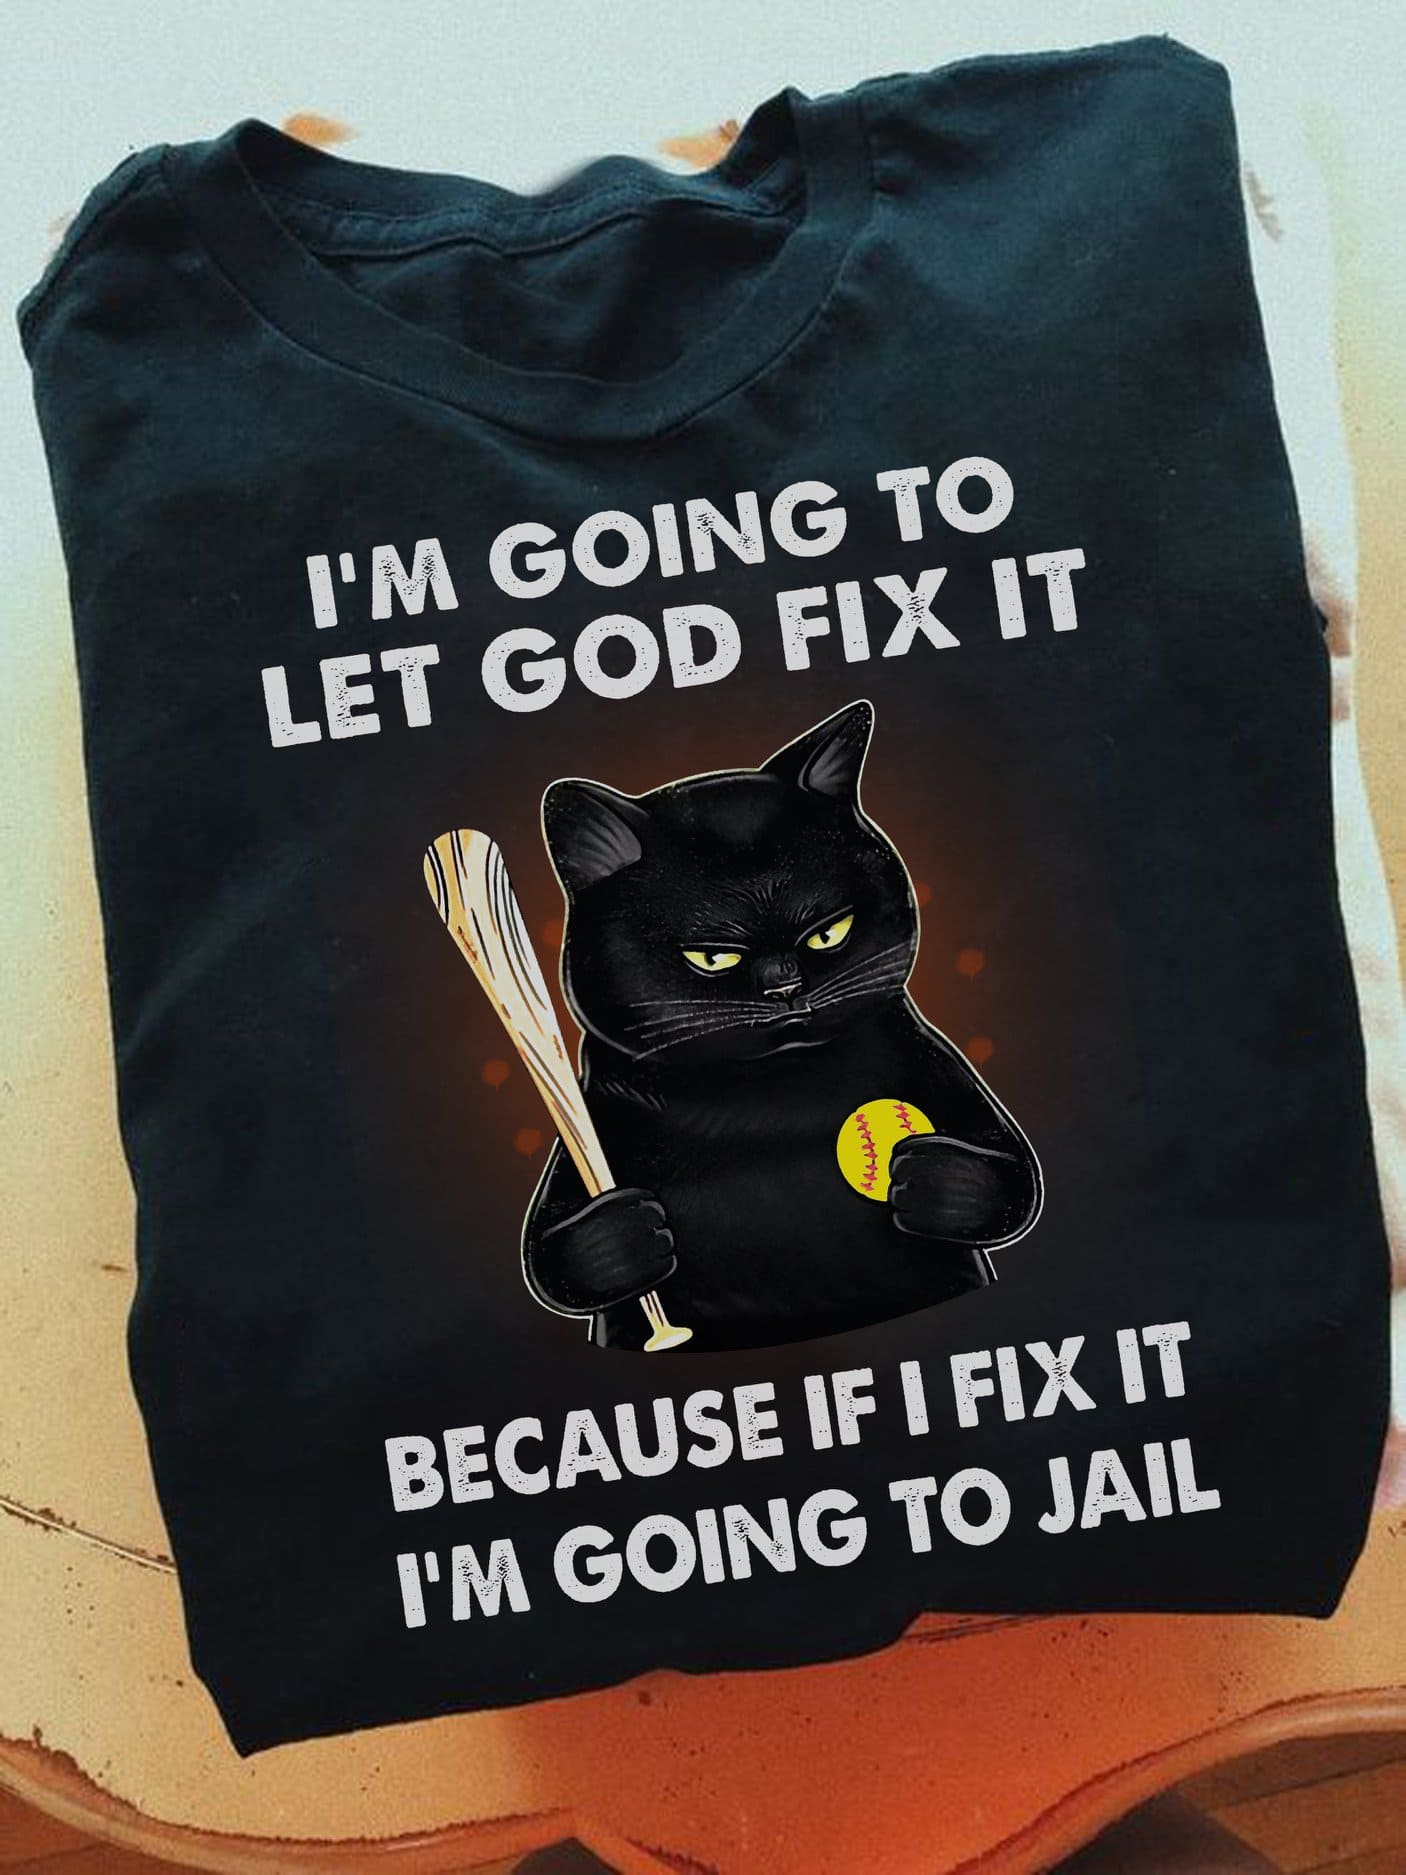 Black Cat Softball - I'm going to let god fix it because if i fix it i'm going to jail